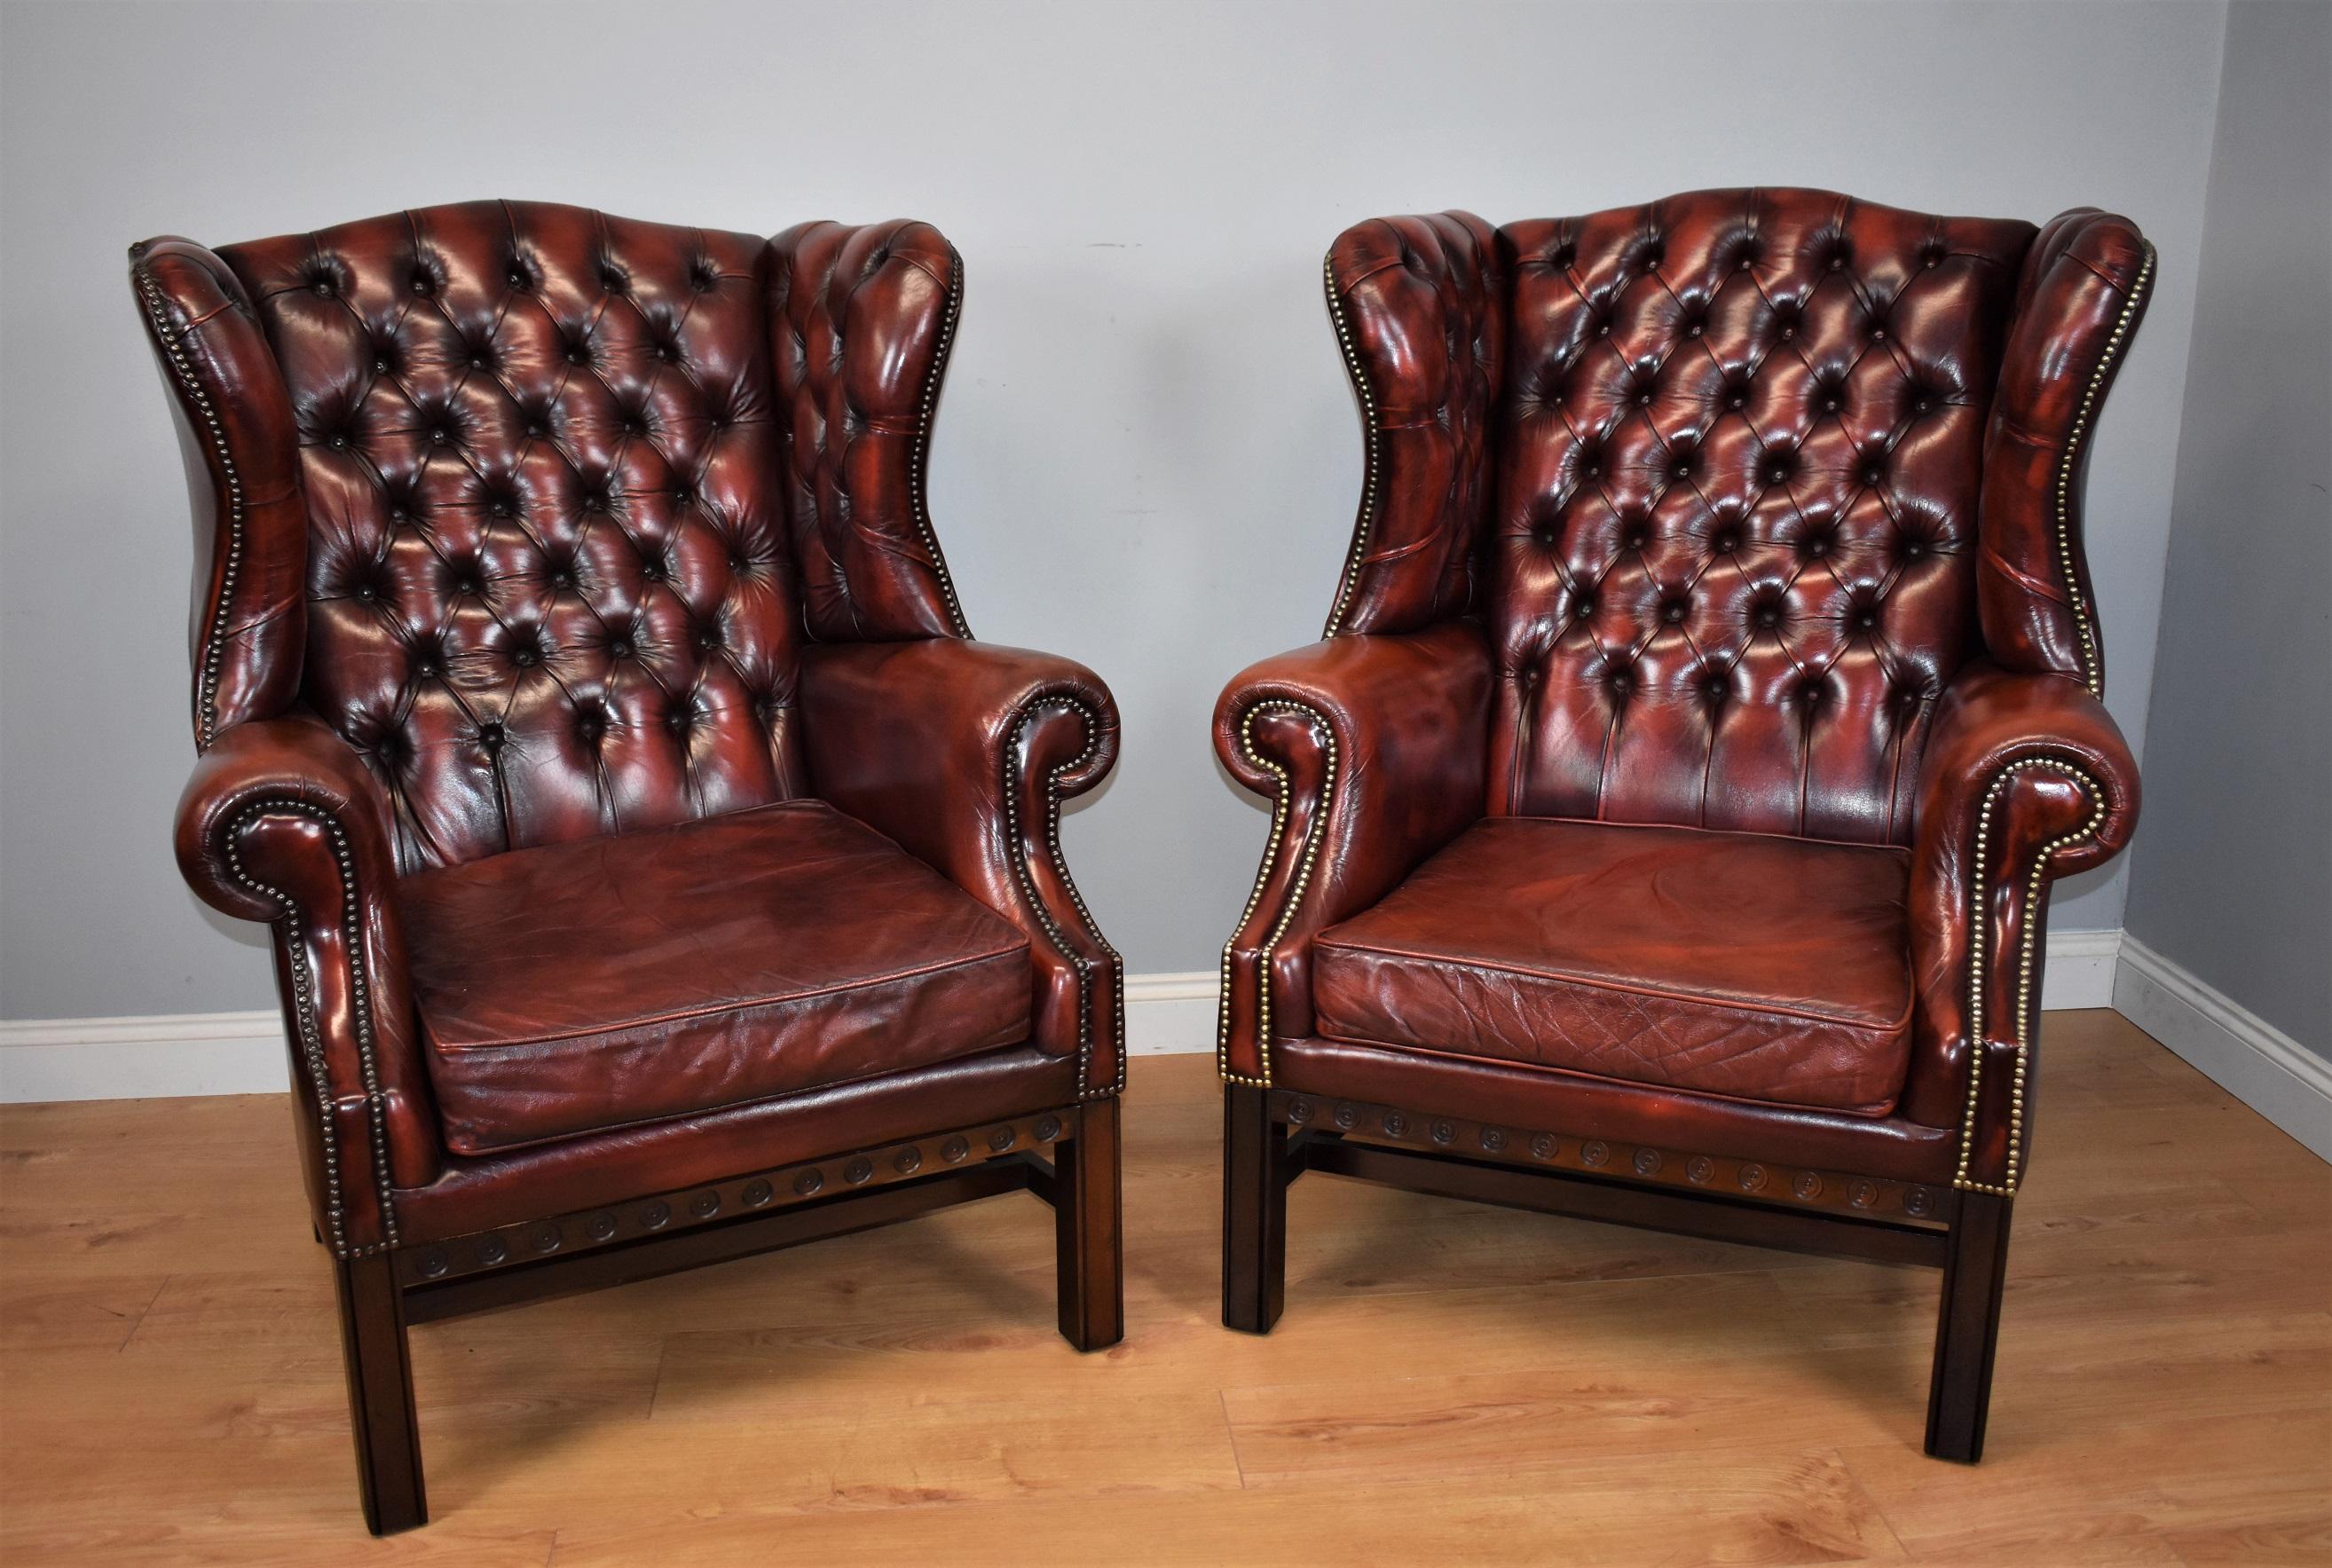 For sale is a good quality pair of red leather wingback armchairs of exceptionally large size. Each chair has a deep buttoned back and upholster seat, flanked by scroll arms with brass studs. The chairs are raised on square legs united by a single